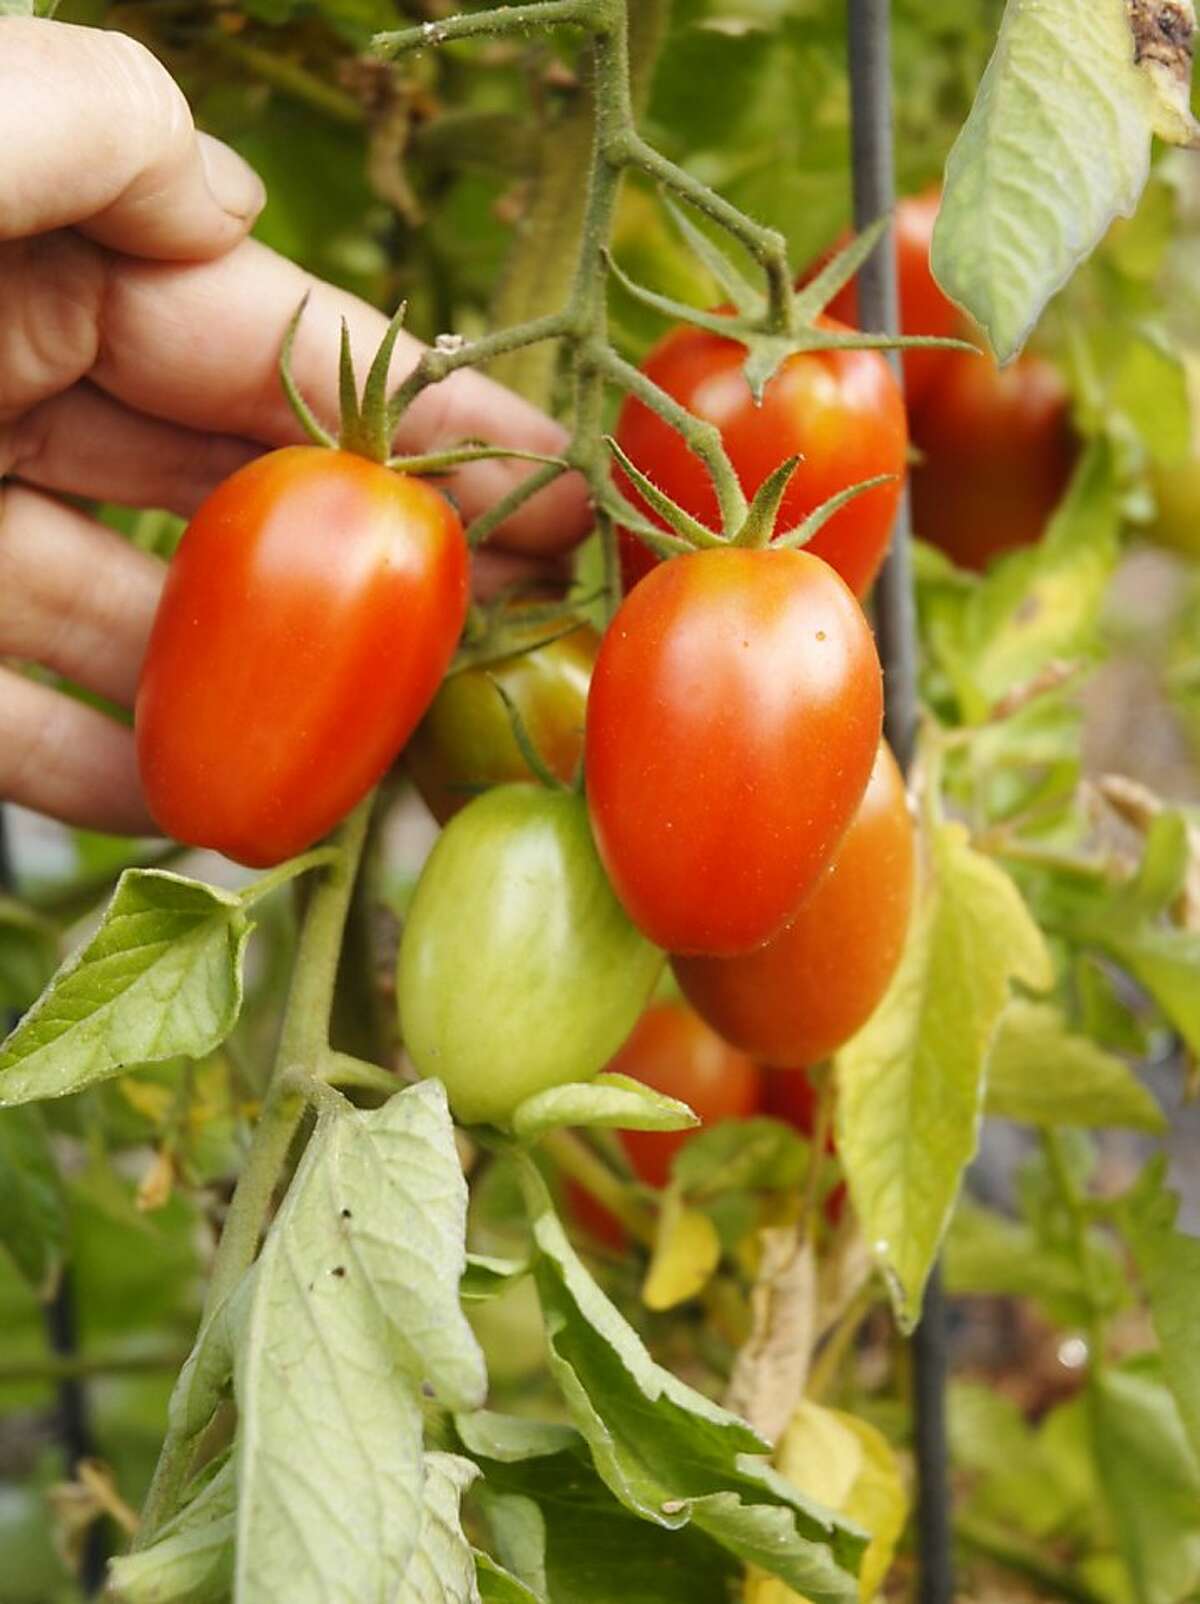 'Juliet' variety tomato shows fairly high resistance to tomato late blight and bears a heavy crop of small "plum" shaped fruits.